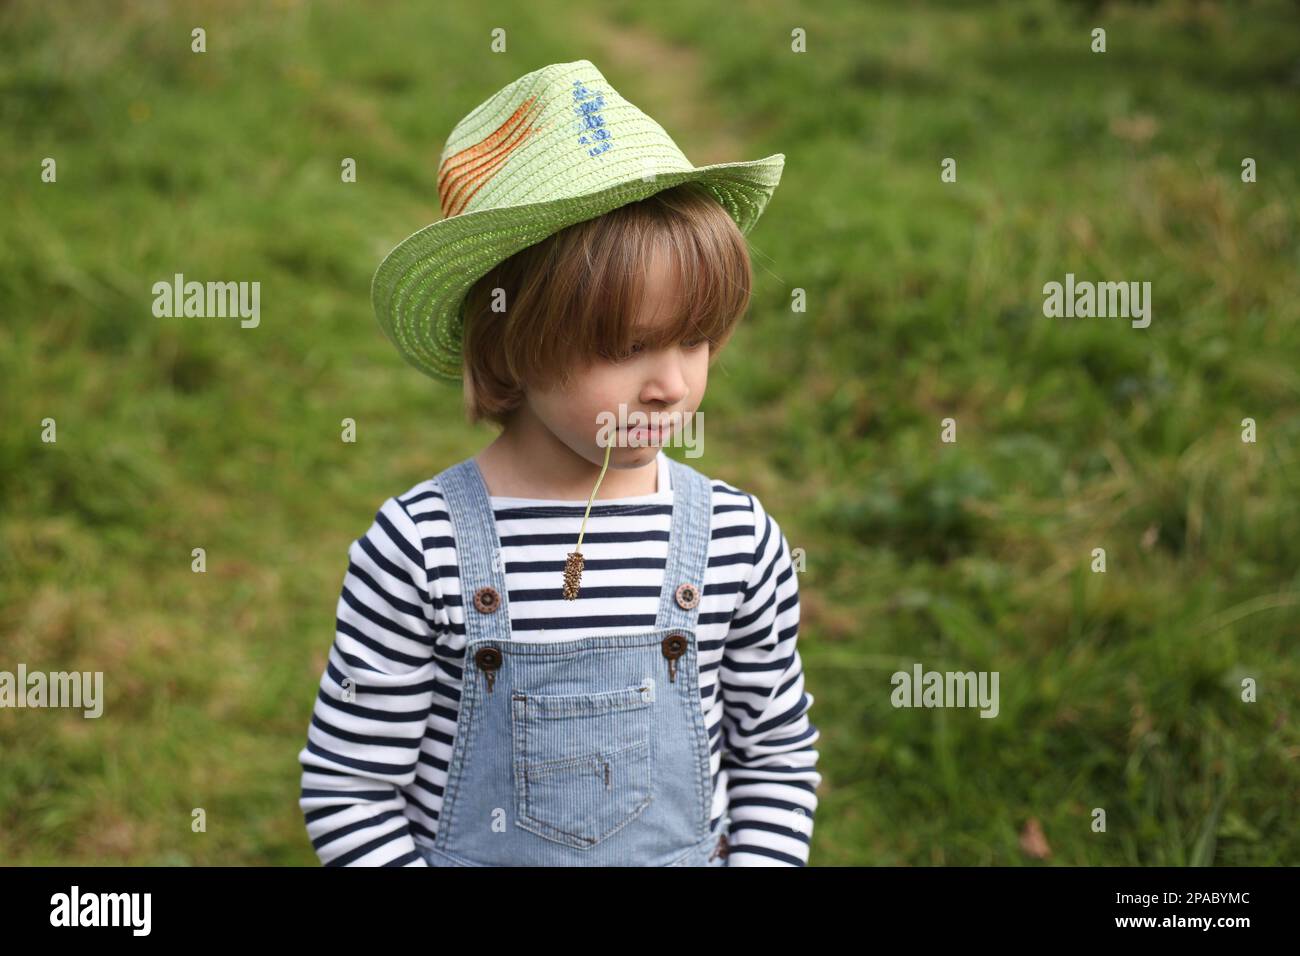 Young child wearing a straw hat Stock Photo